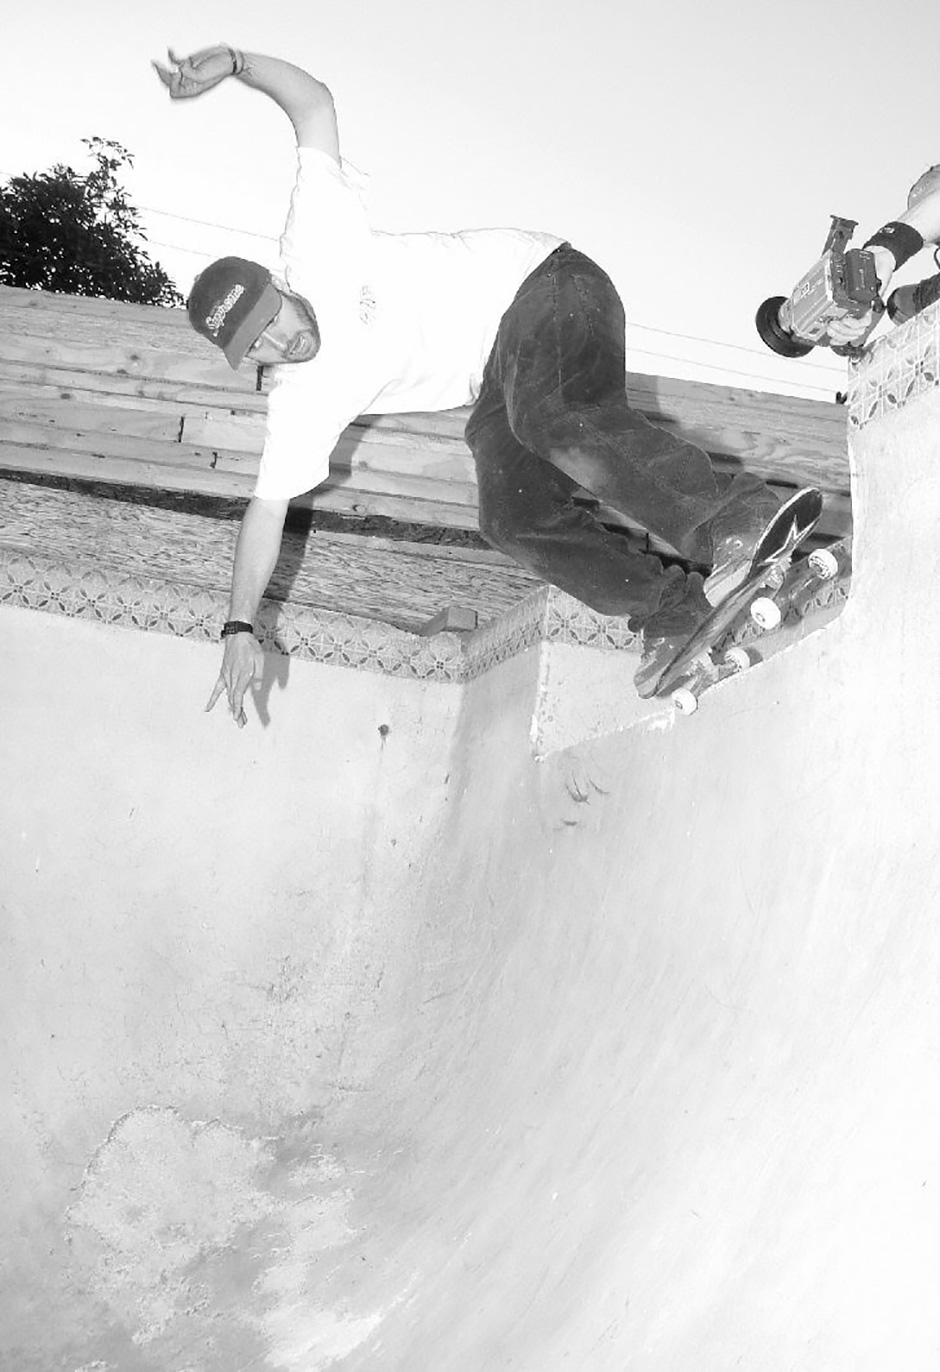 Seth backside pivots in a backyard pool in LA. Jay Doherty captures the moment